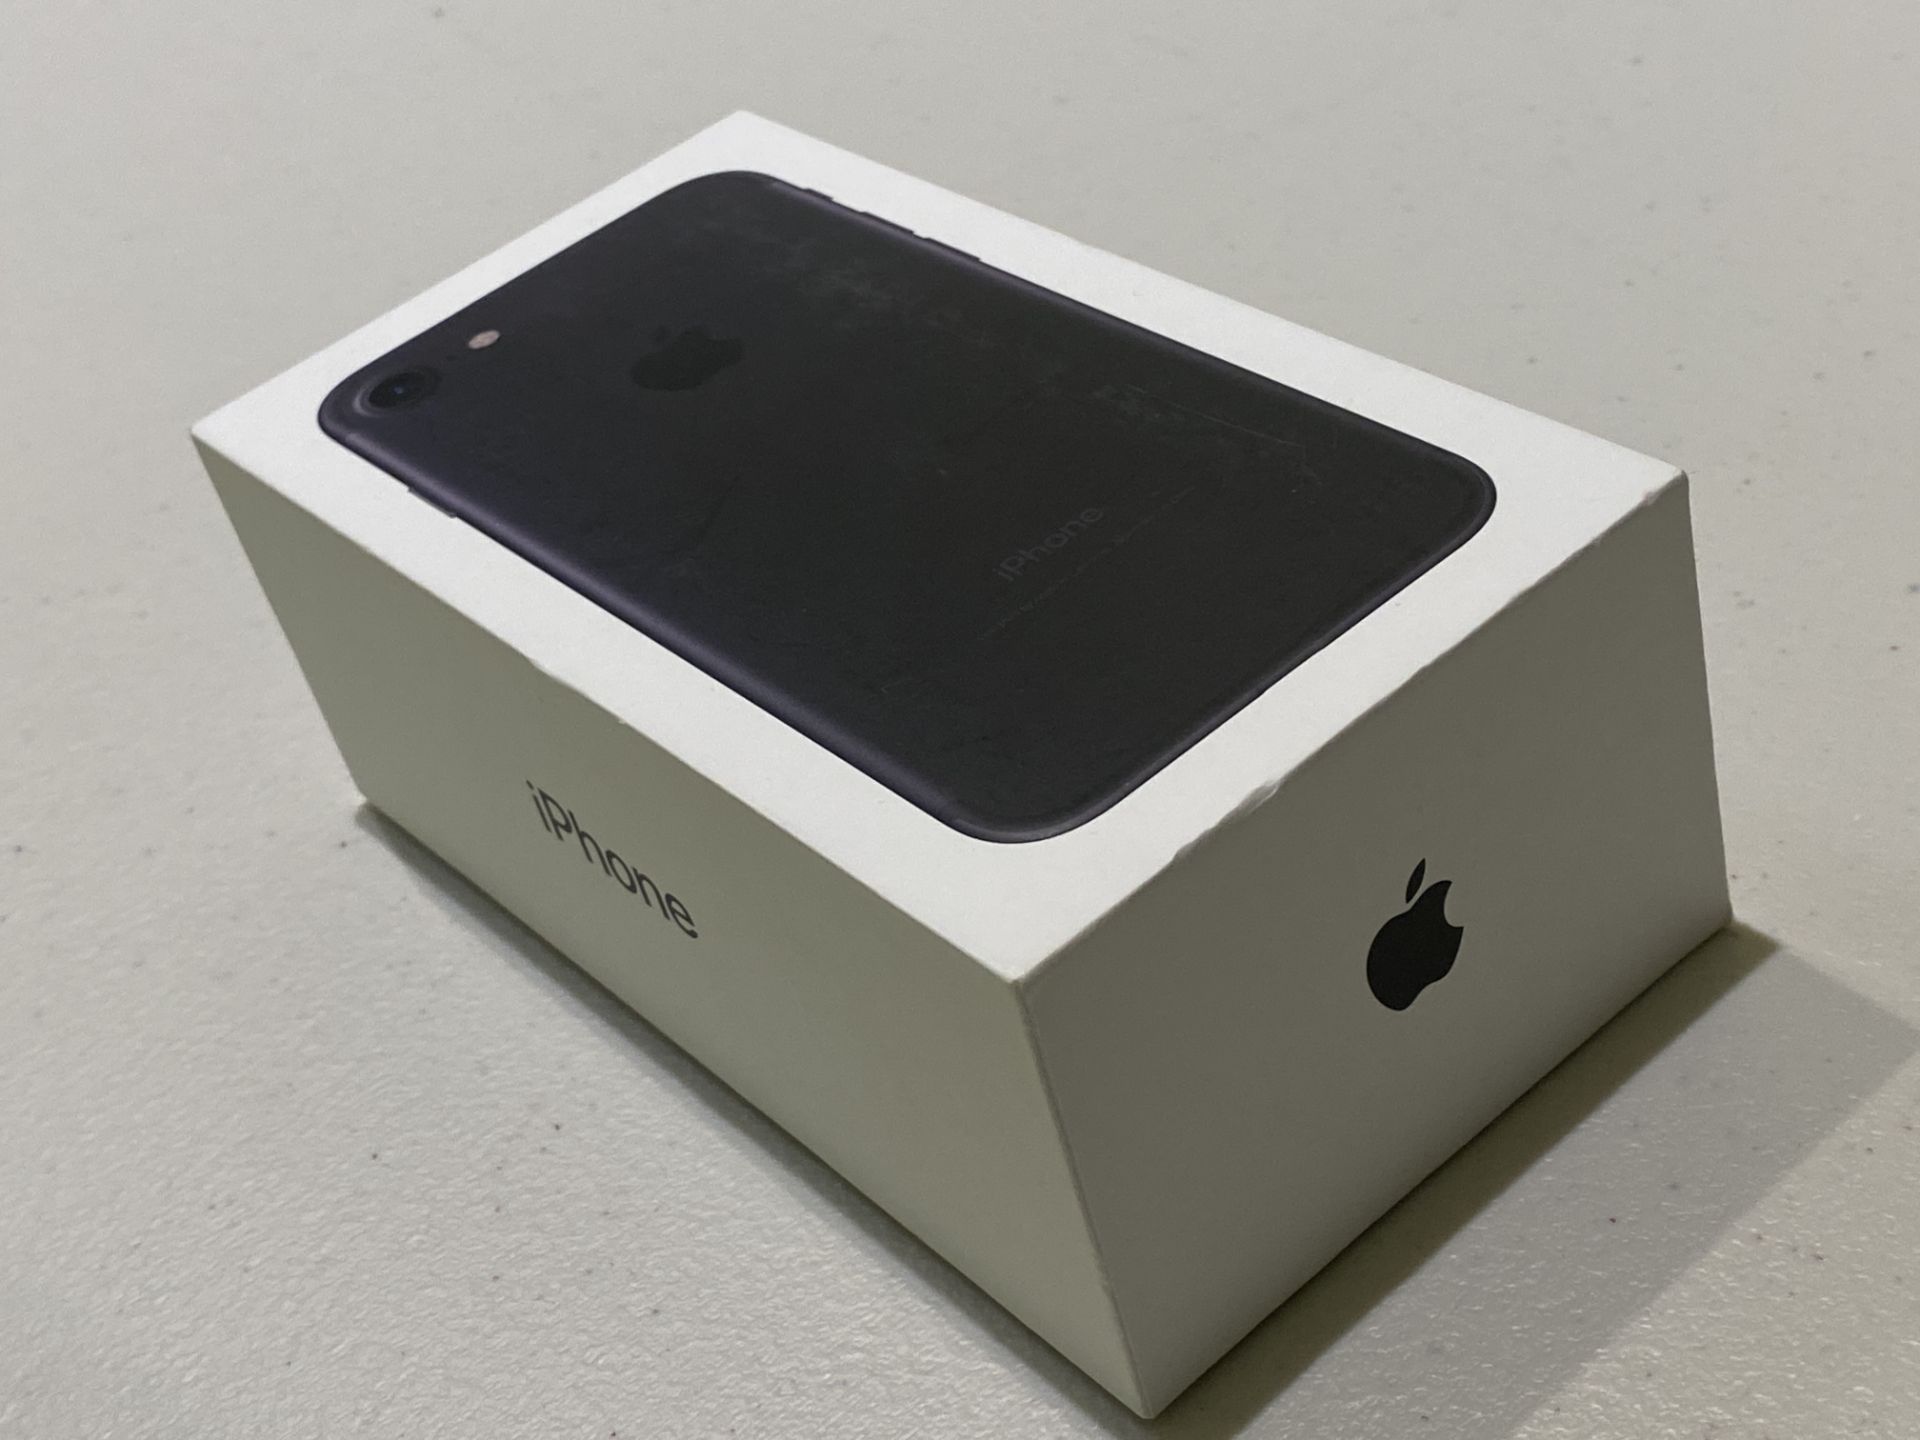 Apple Iphone 7 - 32 GB - Black, In Original Box with No Charger or Cables, Factory Reset, Ready for - Image 10 of 11